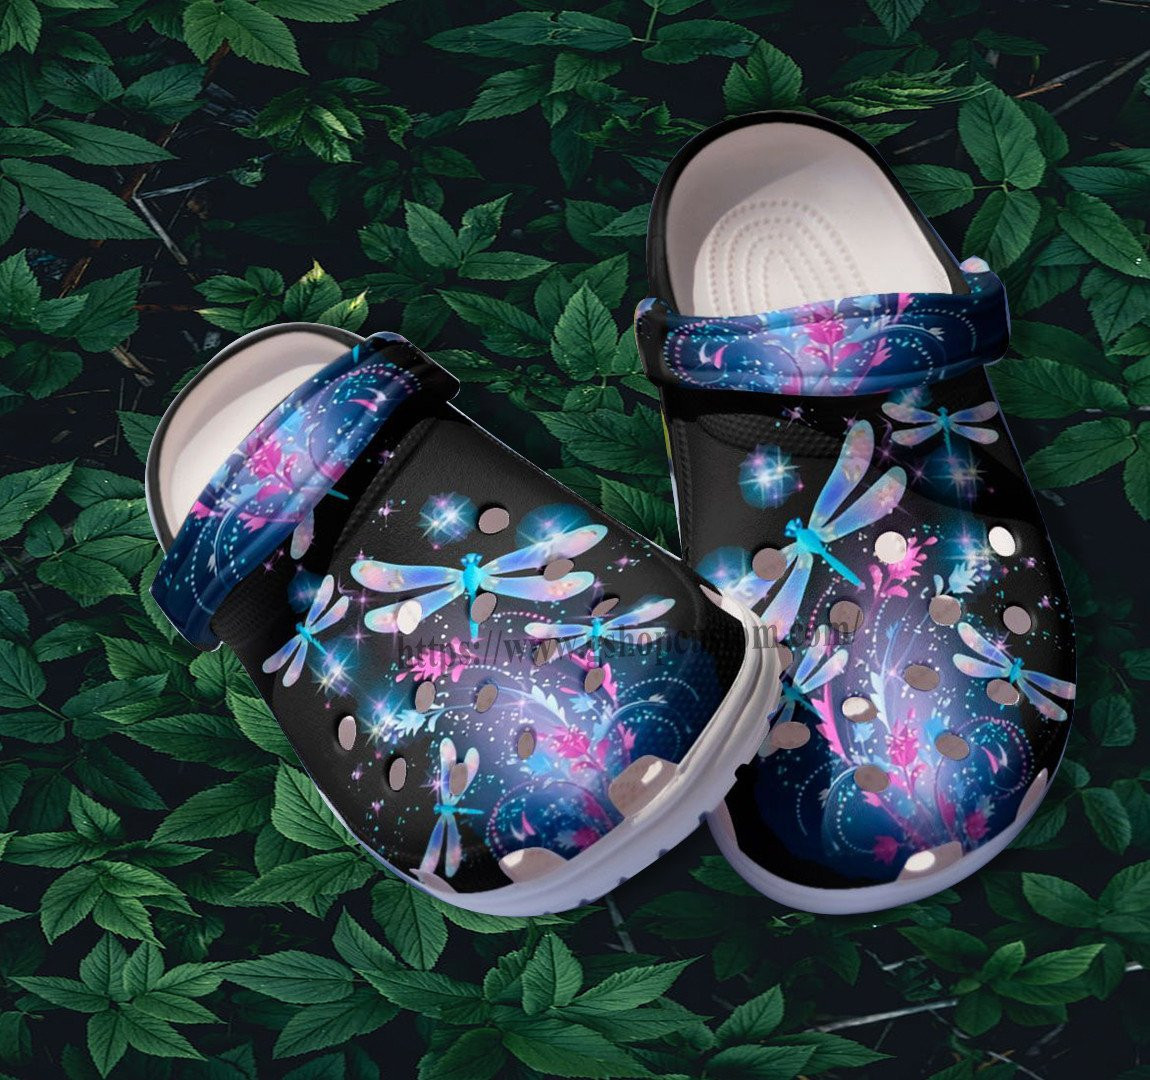 Miracle Dragonfly Hippie Twinkle Croc Crocs Shoes Gift Daughter- Dragonfly Dream Crocs Shoes Croc Clogs Gift Birthday Girl